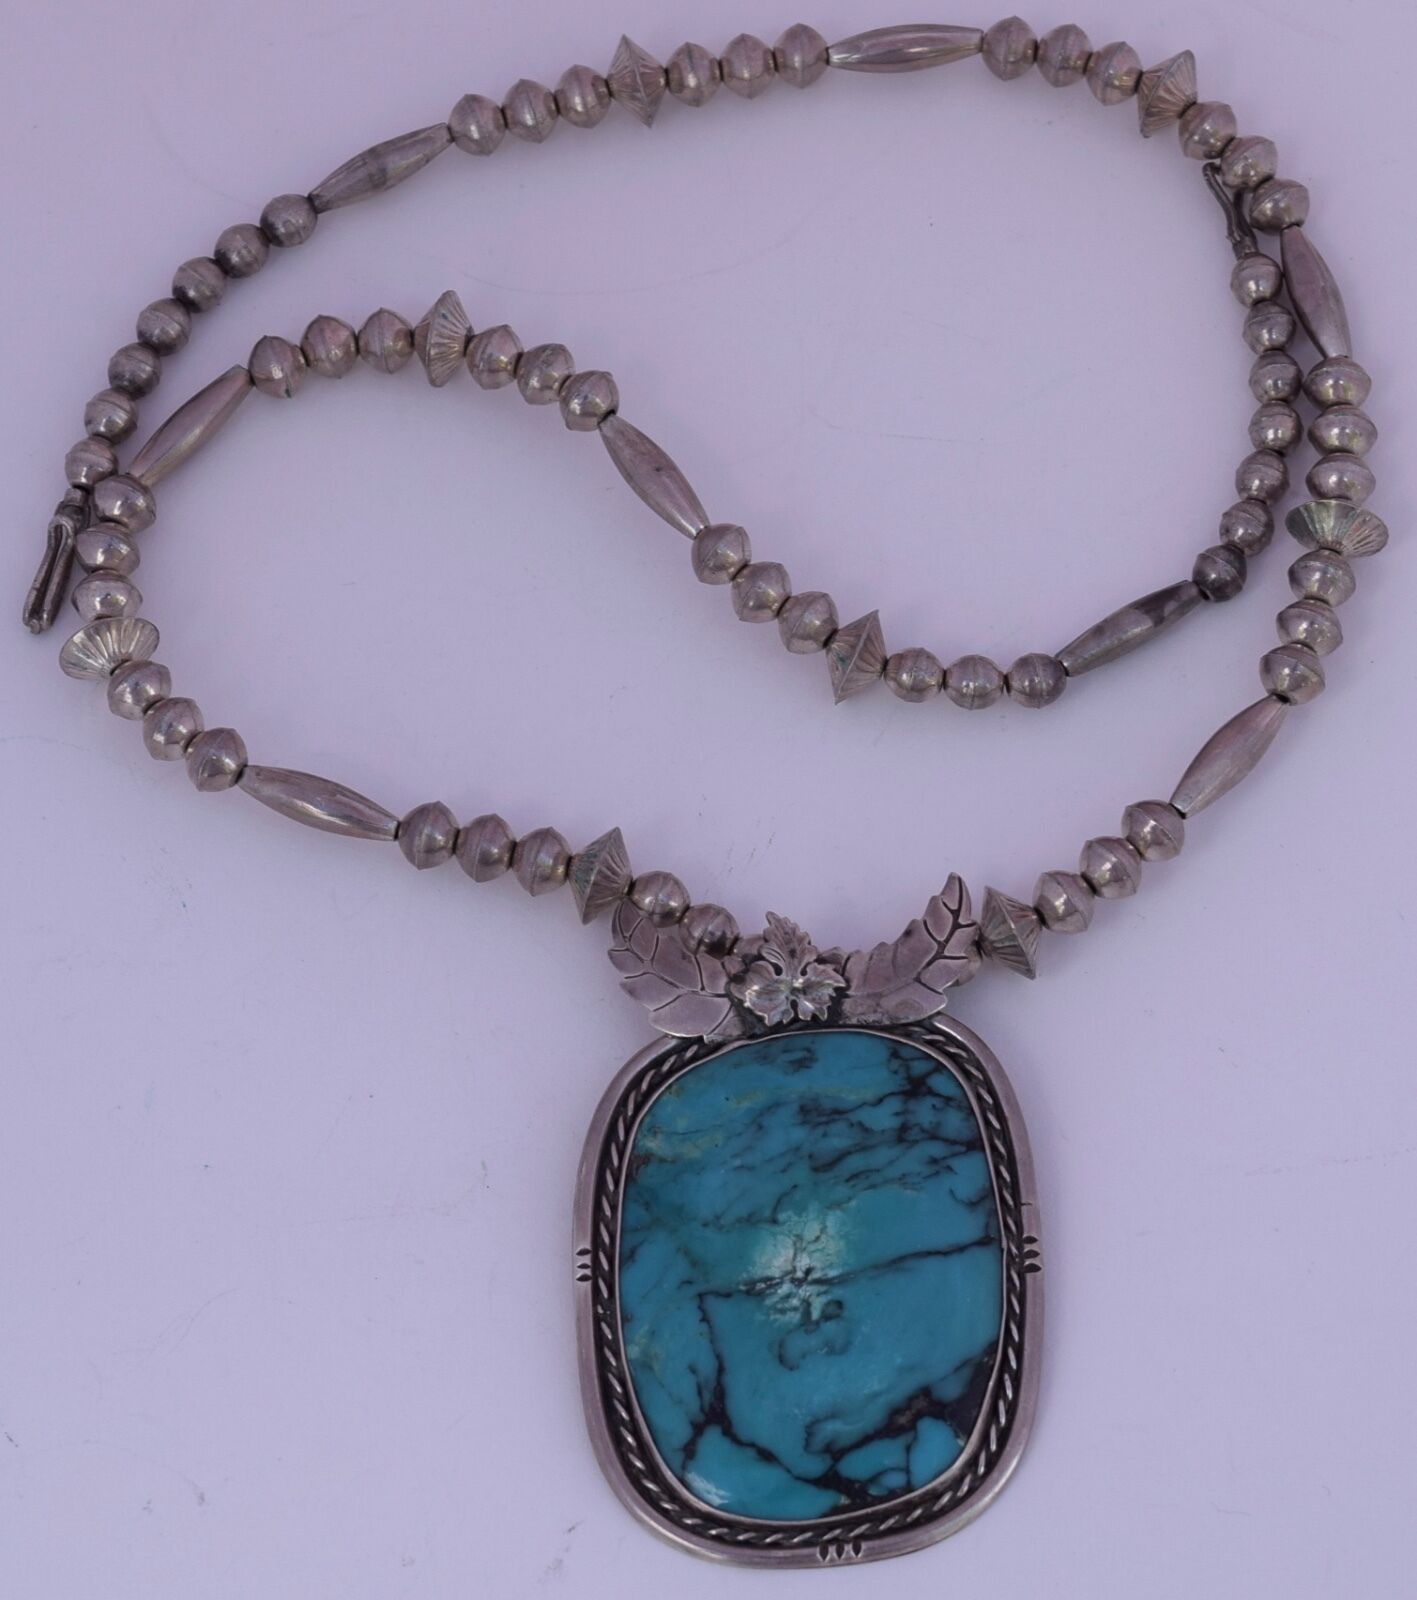 Vintage Native American Navajo sterling silver large Turquoise pendant necklace